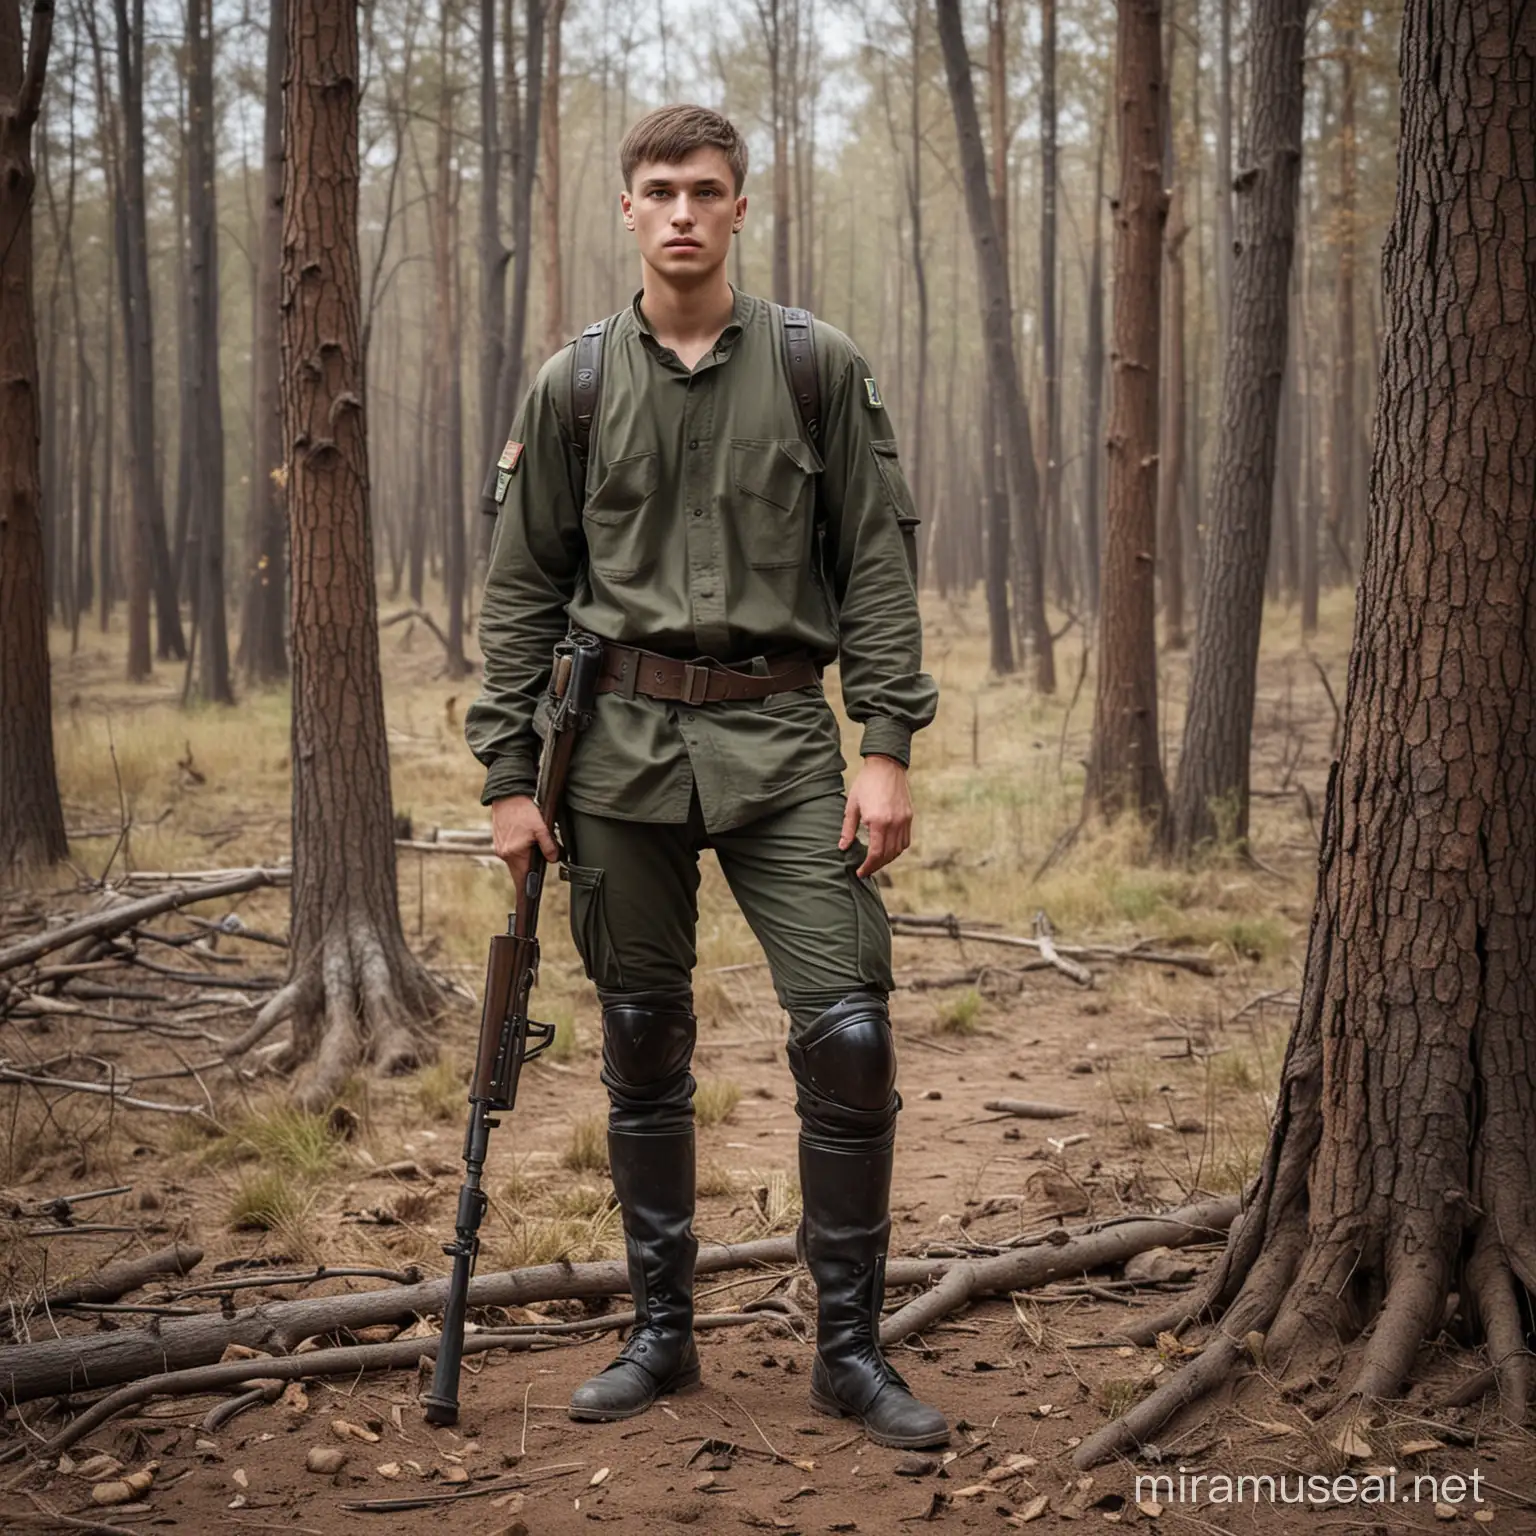 20-year old Ukrainian man with an upbeat attitude and a great sense of humor gun fighting in deep dry forests with half cut trees against the Russians with a prosthetic metal leg